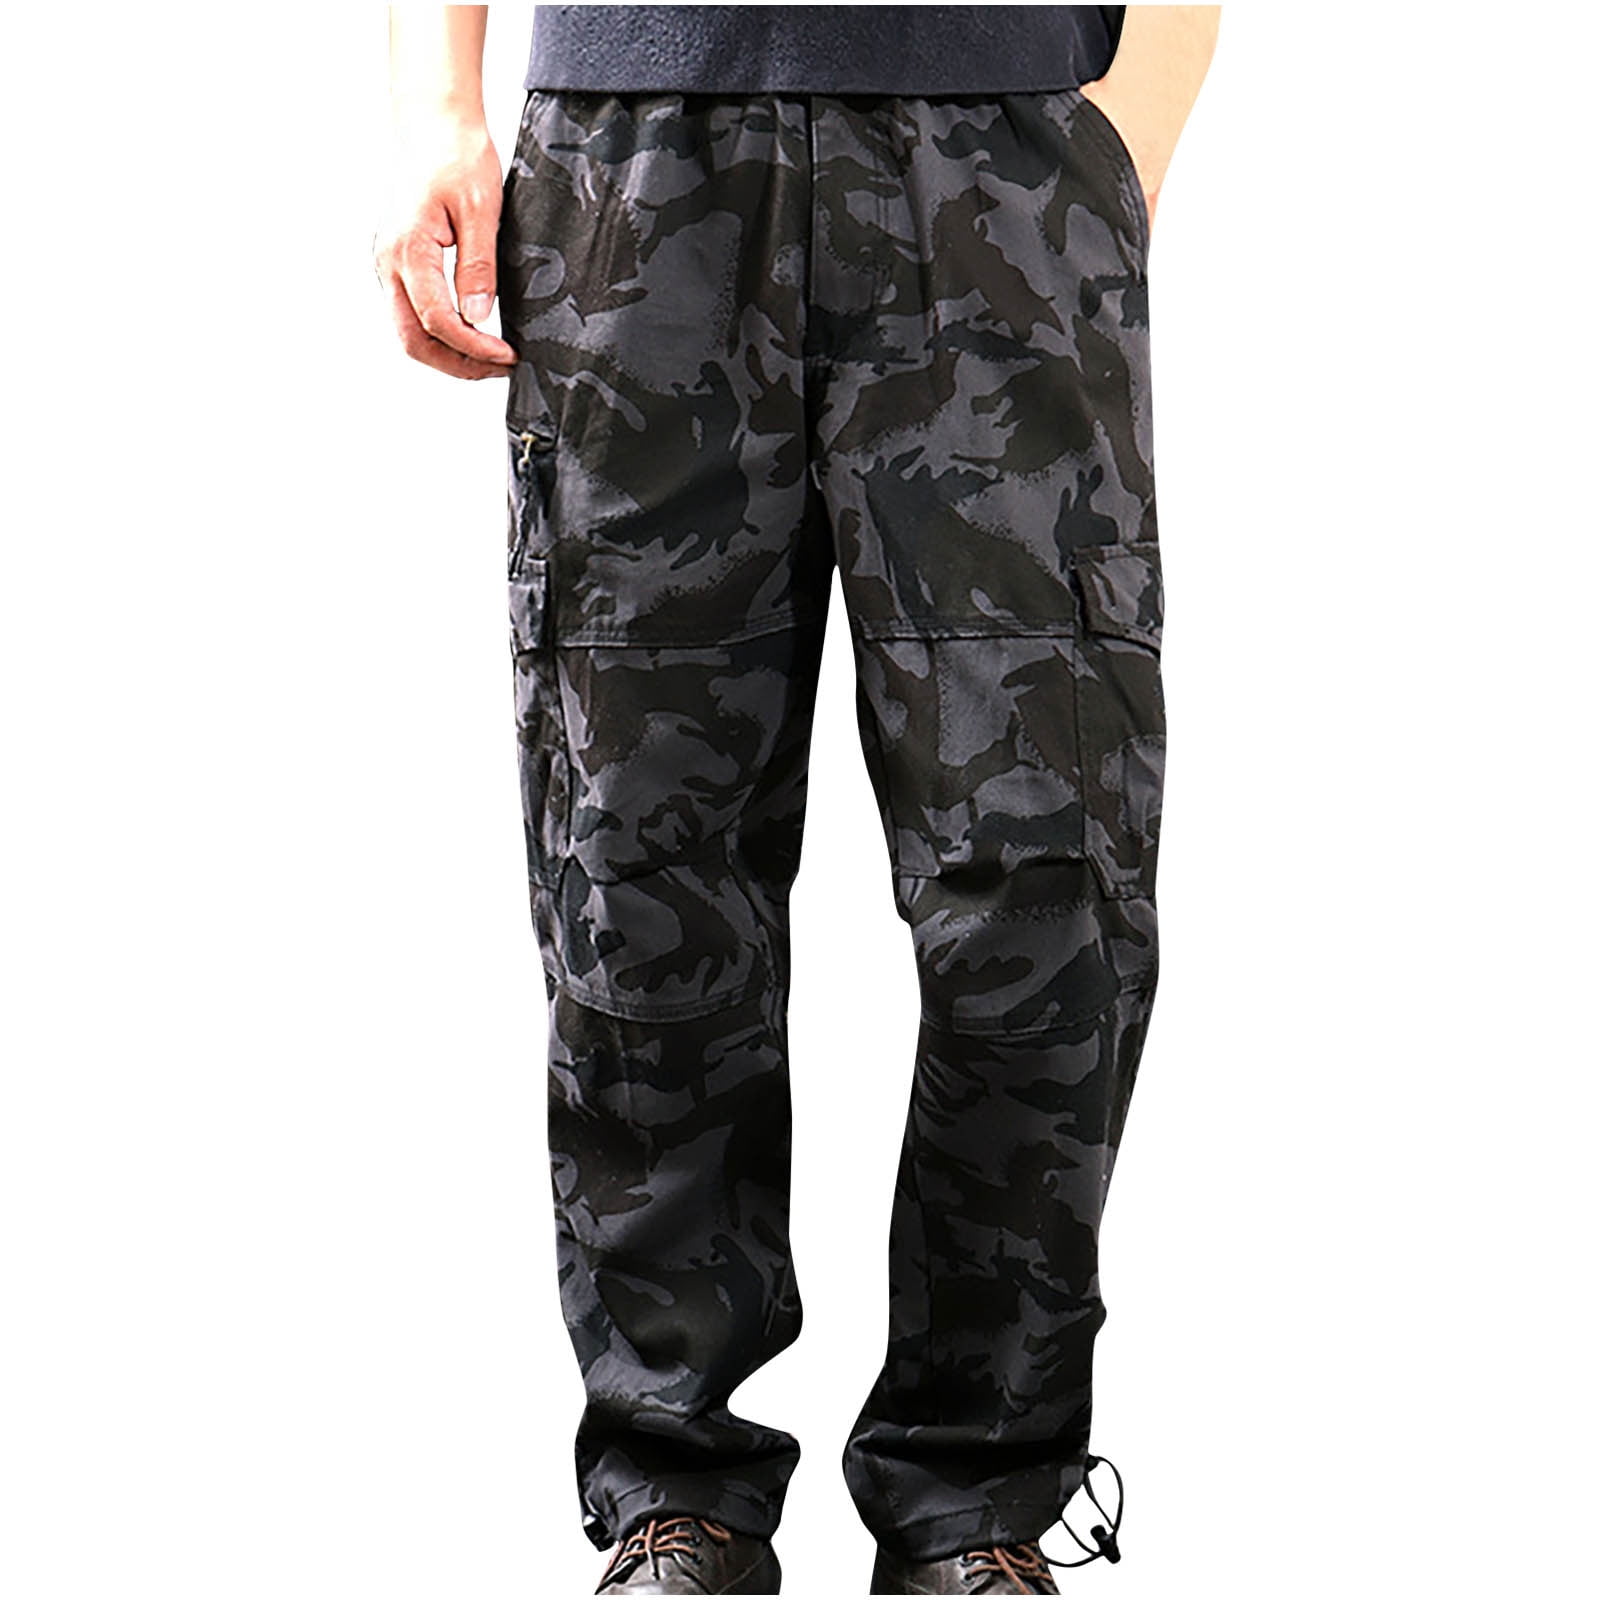 SMihono Men's Cargo Pants Slim Multi Pocket Straight Trousers Outdoor  Sports Overalls Pants Beach Trousers Rugged Stretch Jogger Utility  Sweatpants